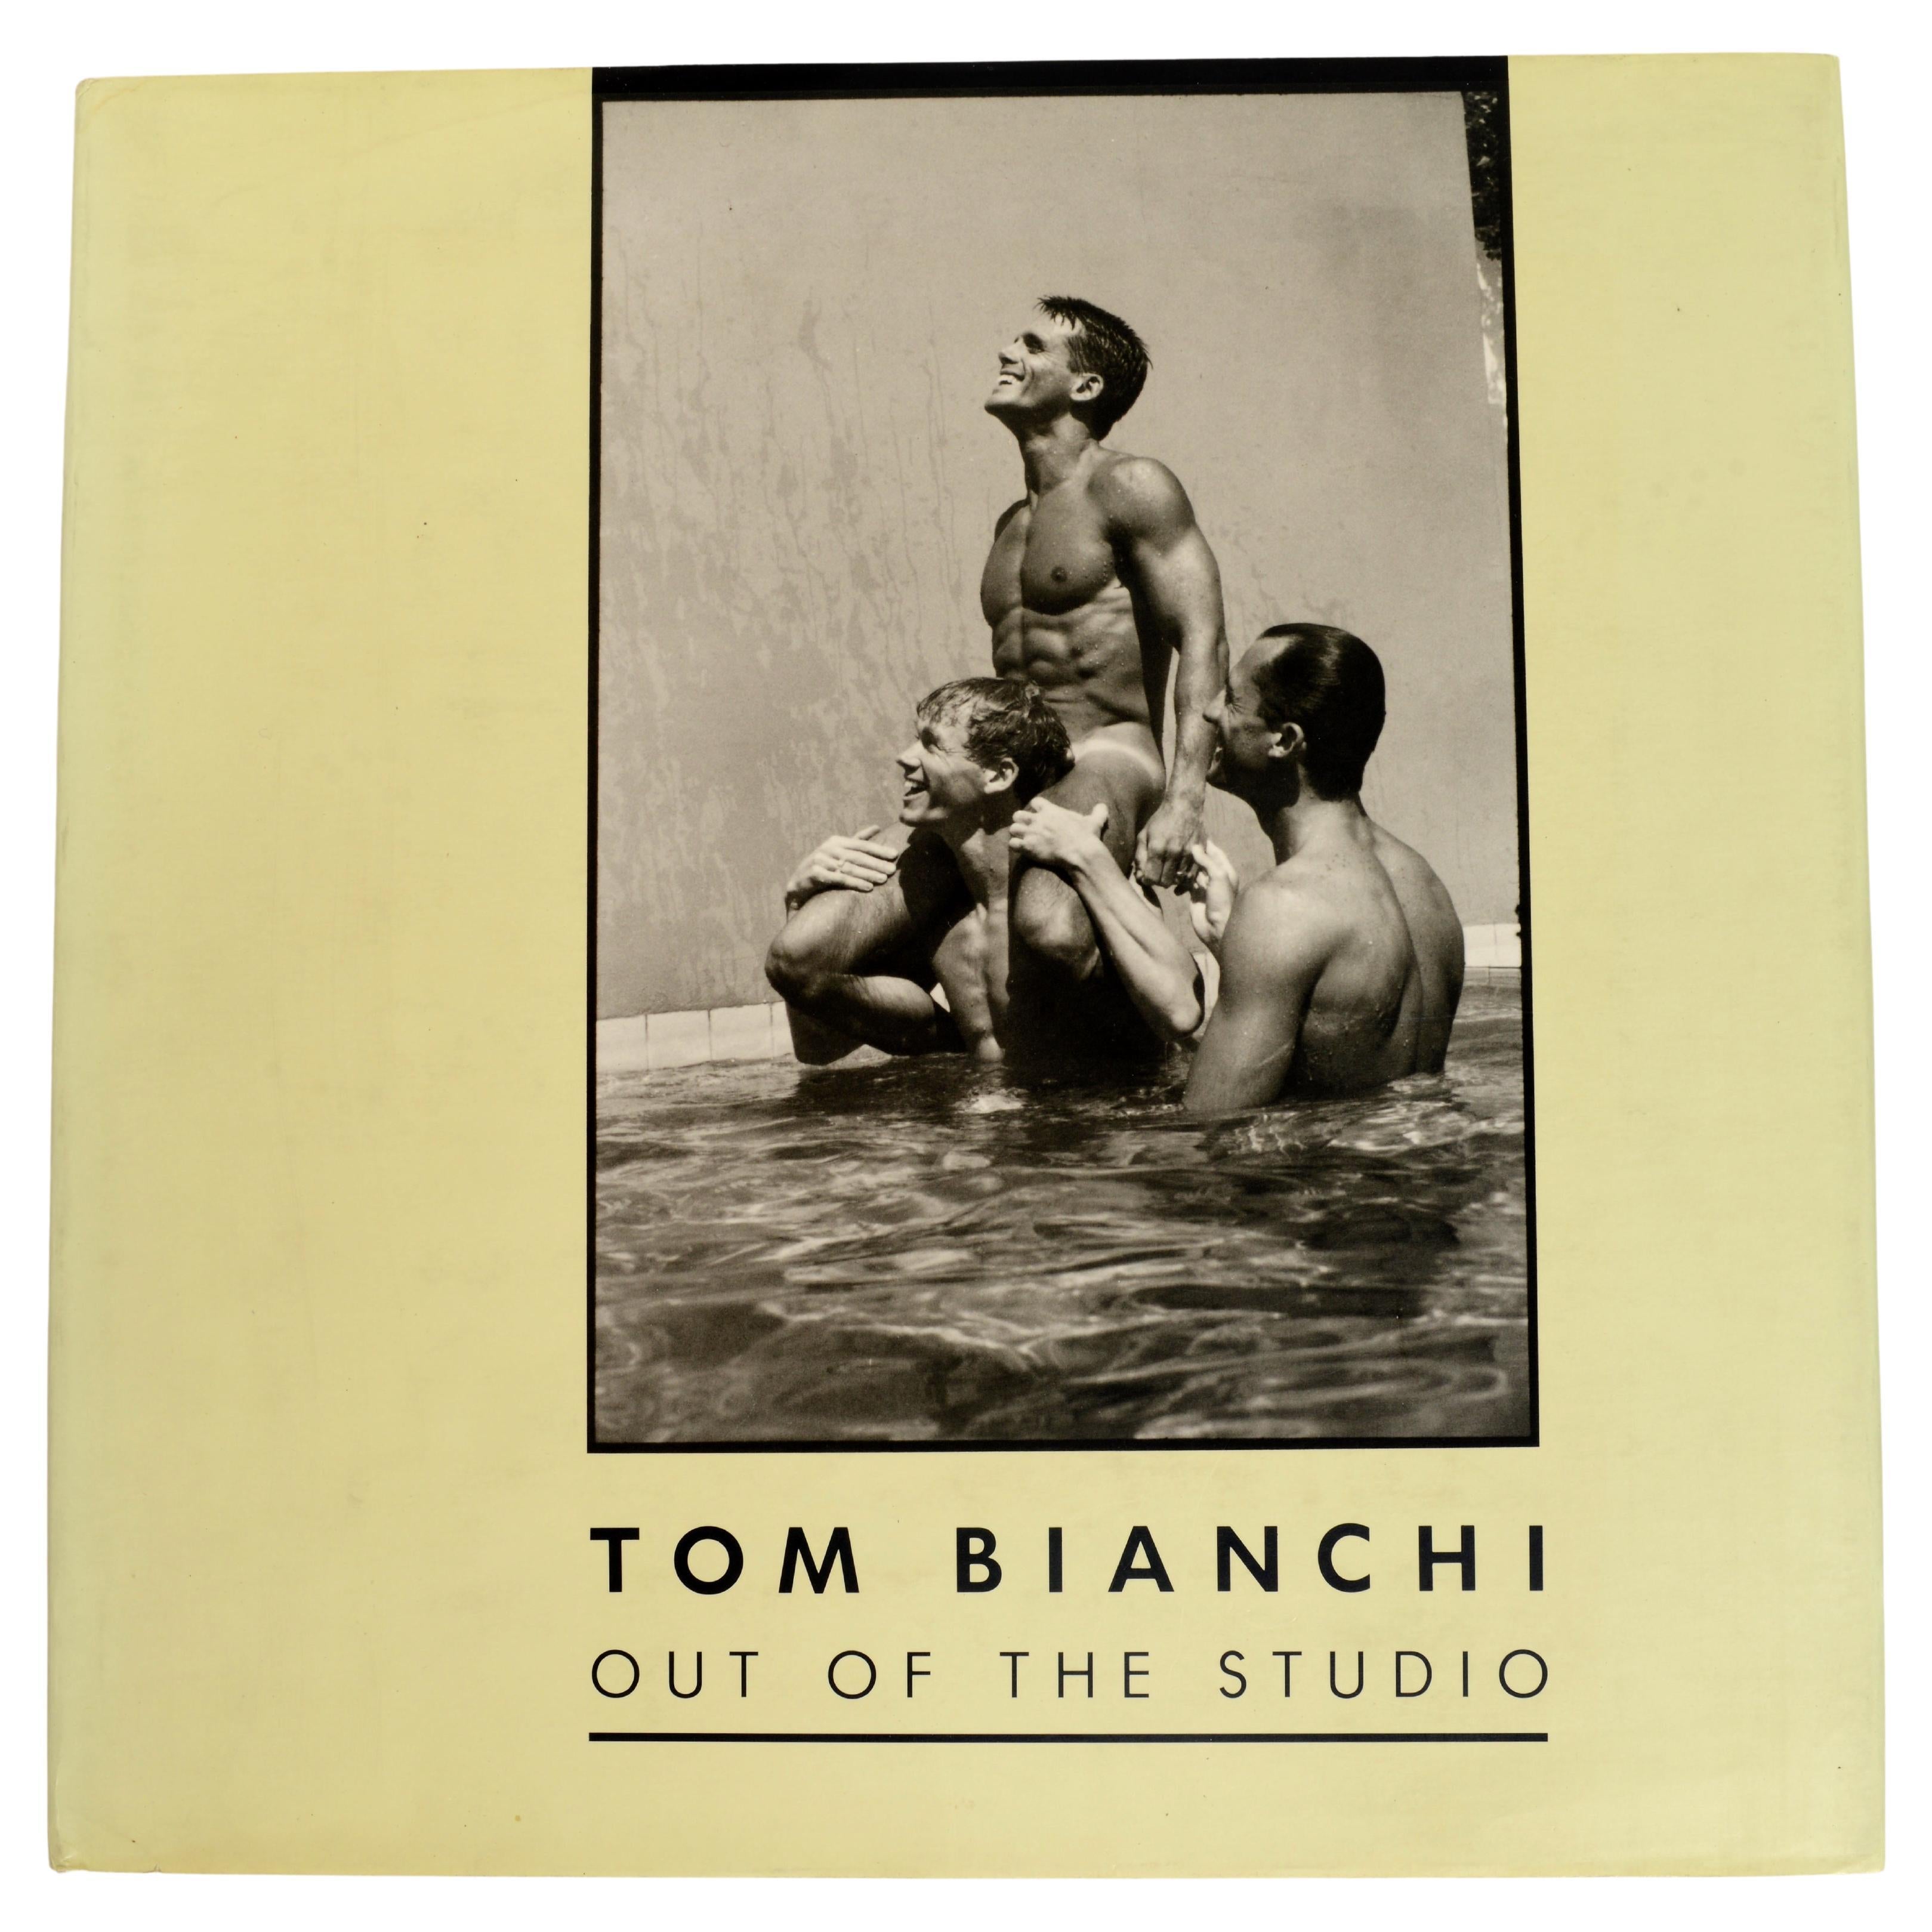 Out of the Studio de Tom Bianchi, Stated 1st Ed